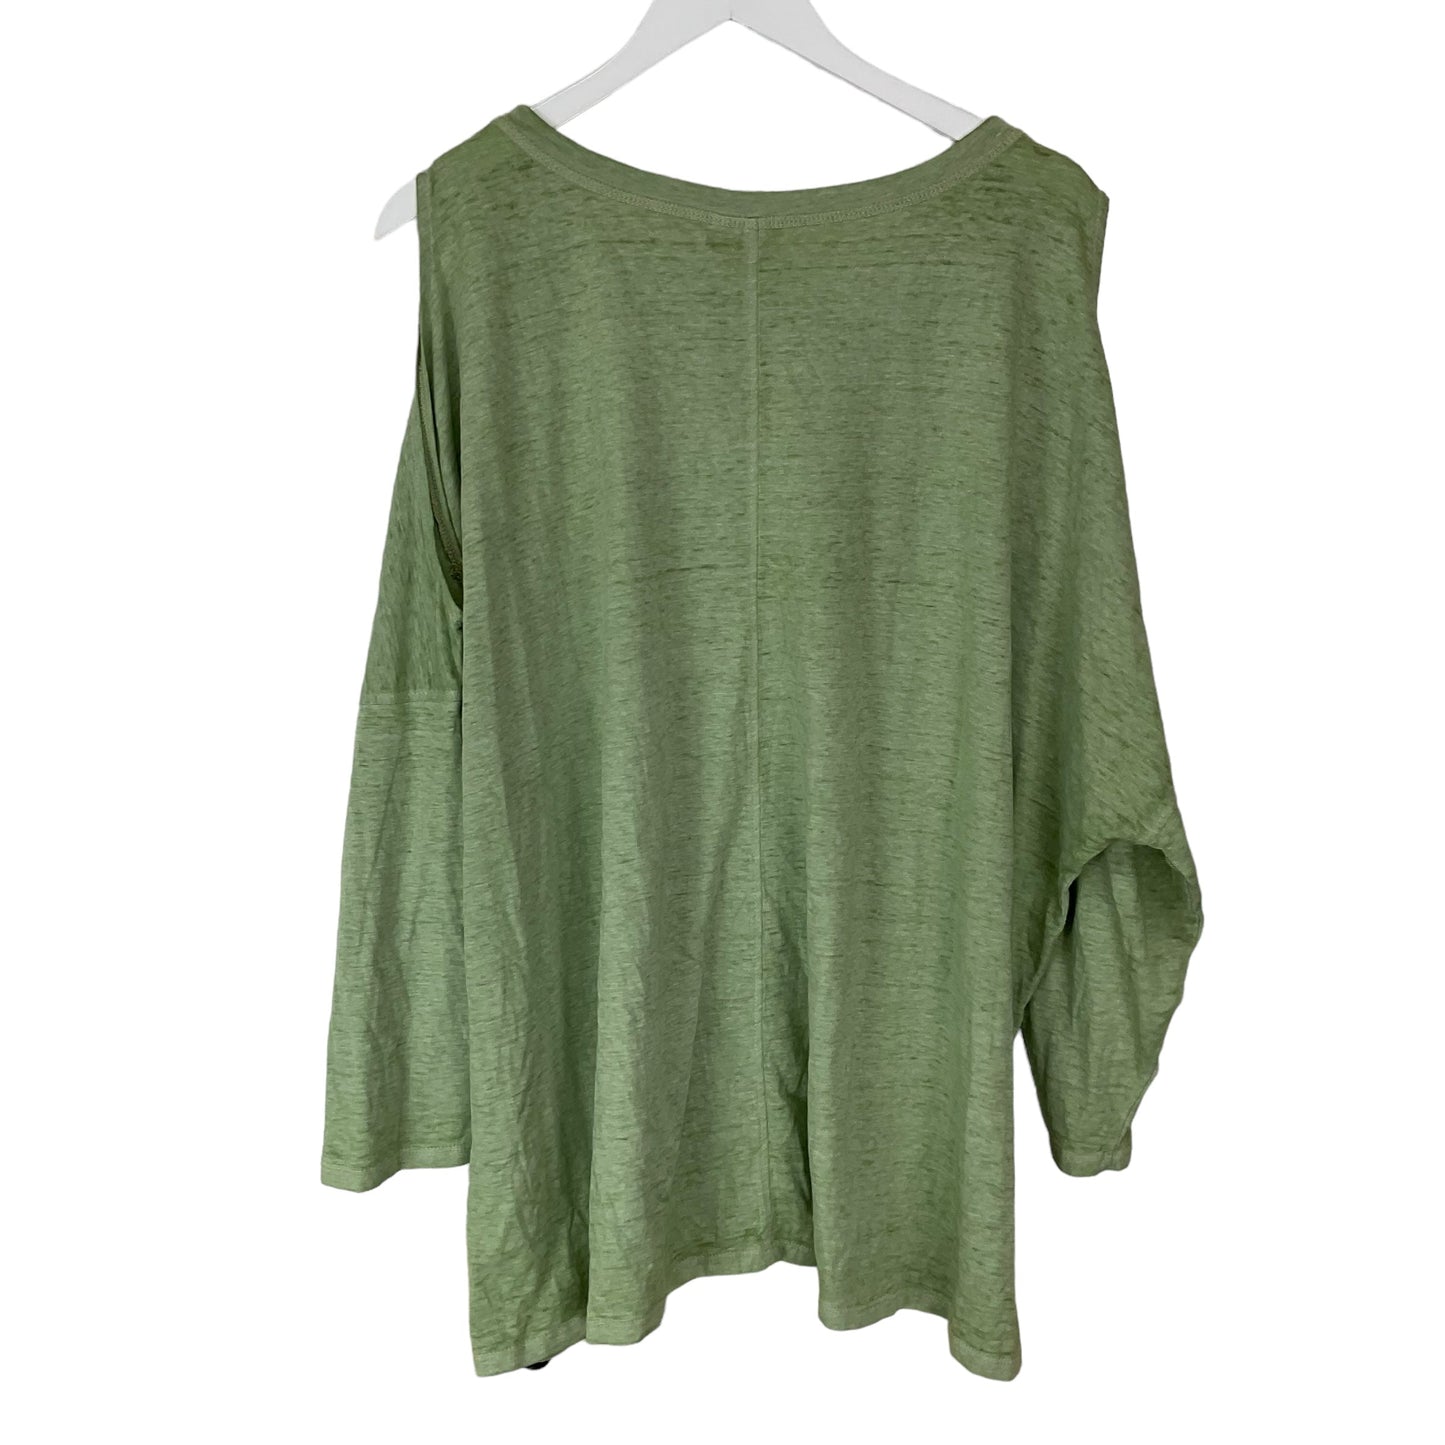 Green Top Long Sleeve Cato, Size 3x